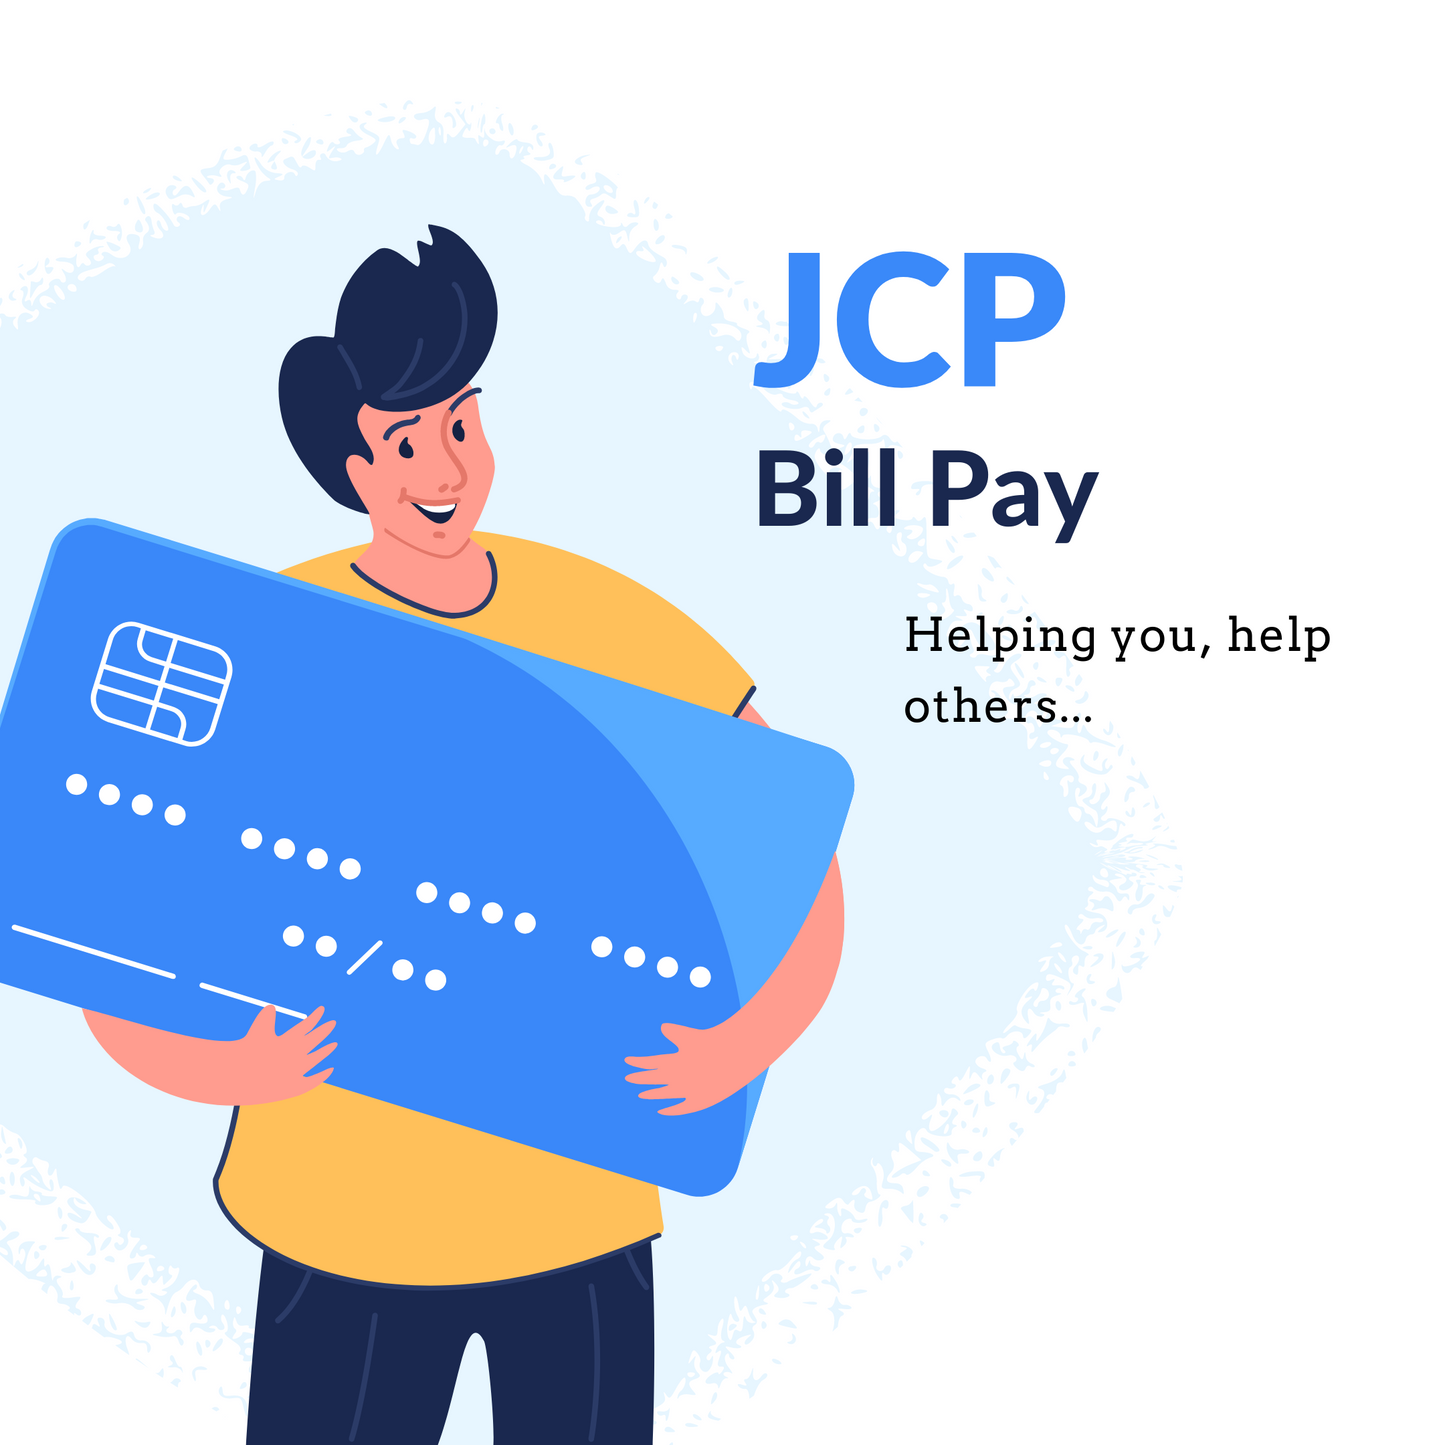 JCP Bill Pay